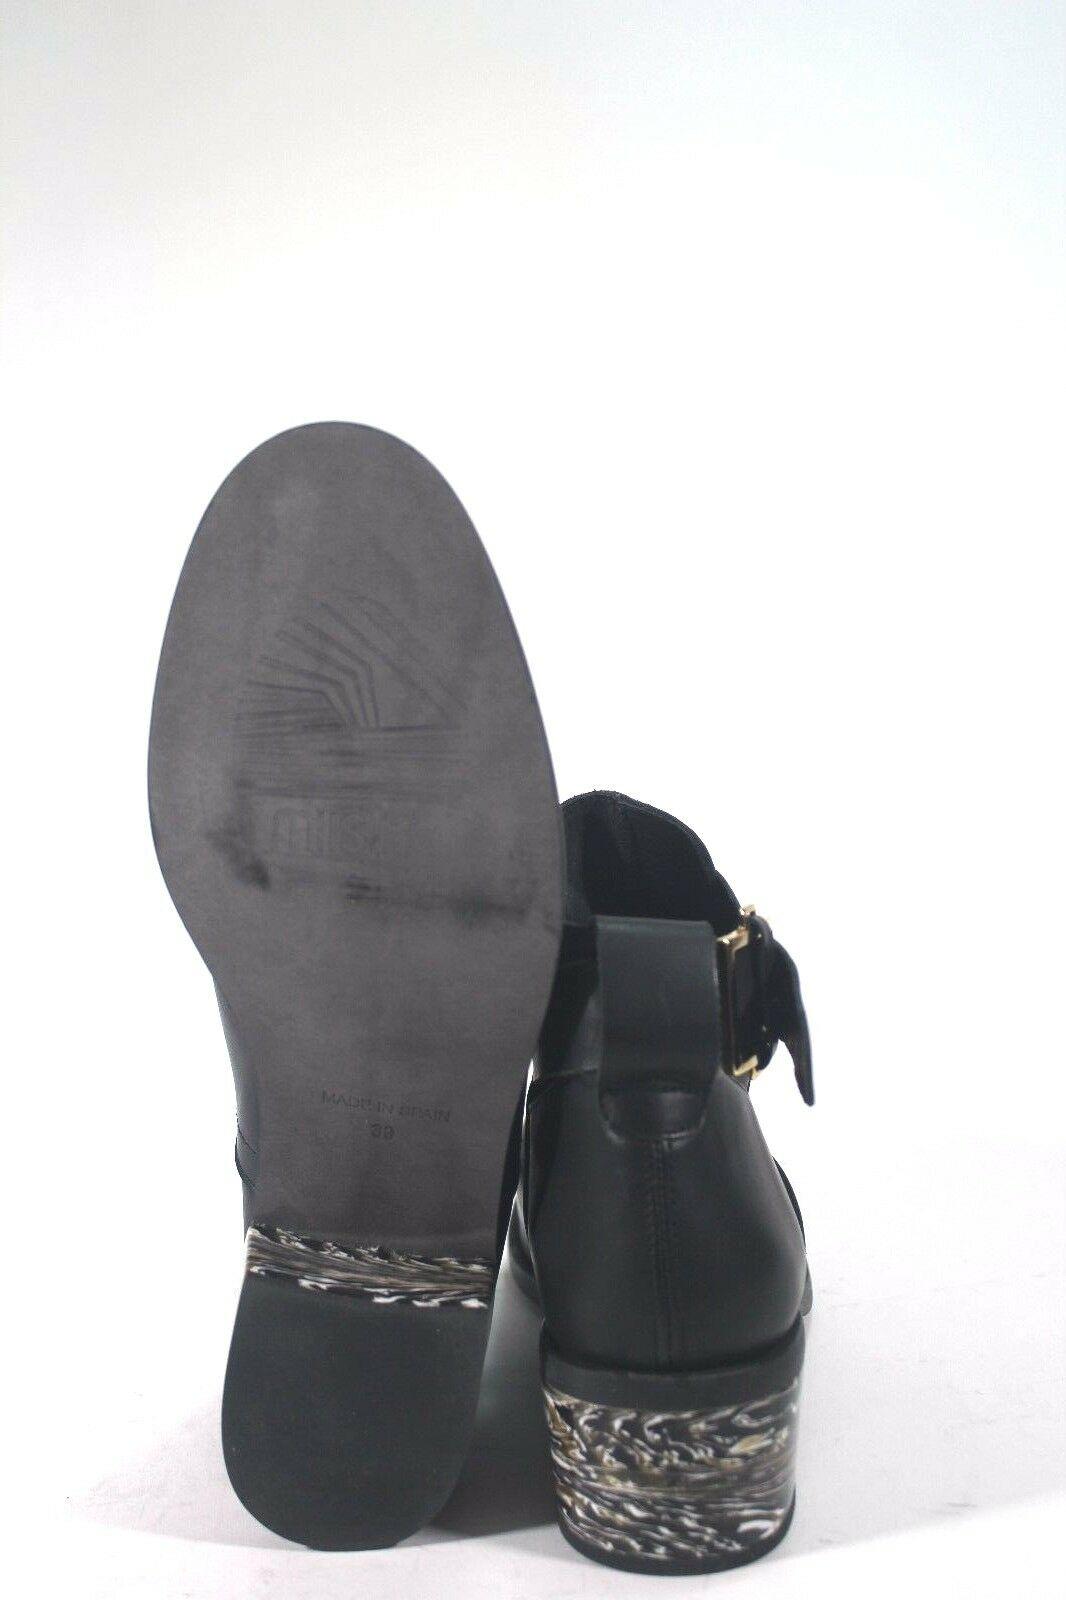 Miista Clarissa Black Womens Leather Ankle Boots Size 39 - SVNYFancy